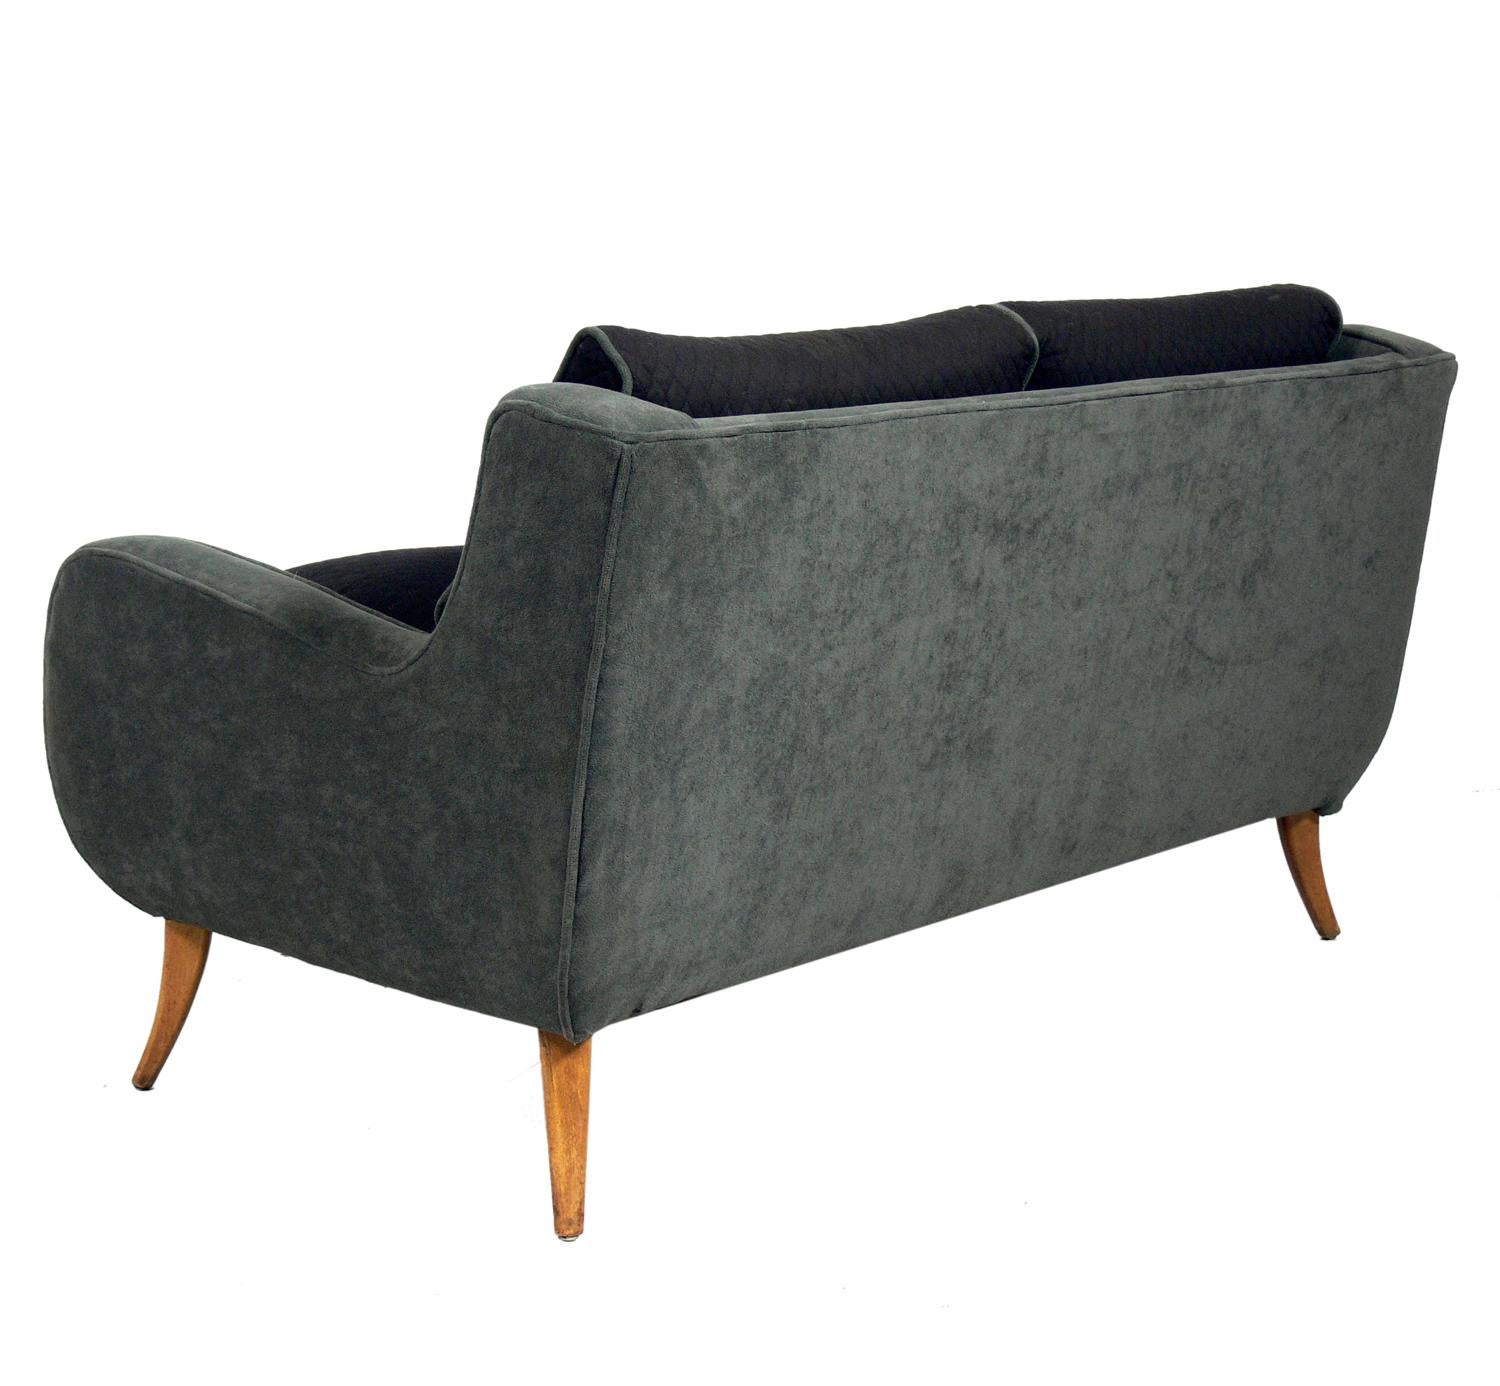 American Curvaceous Settee or Sofa by Ernst Schwadron